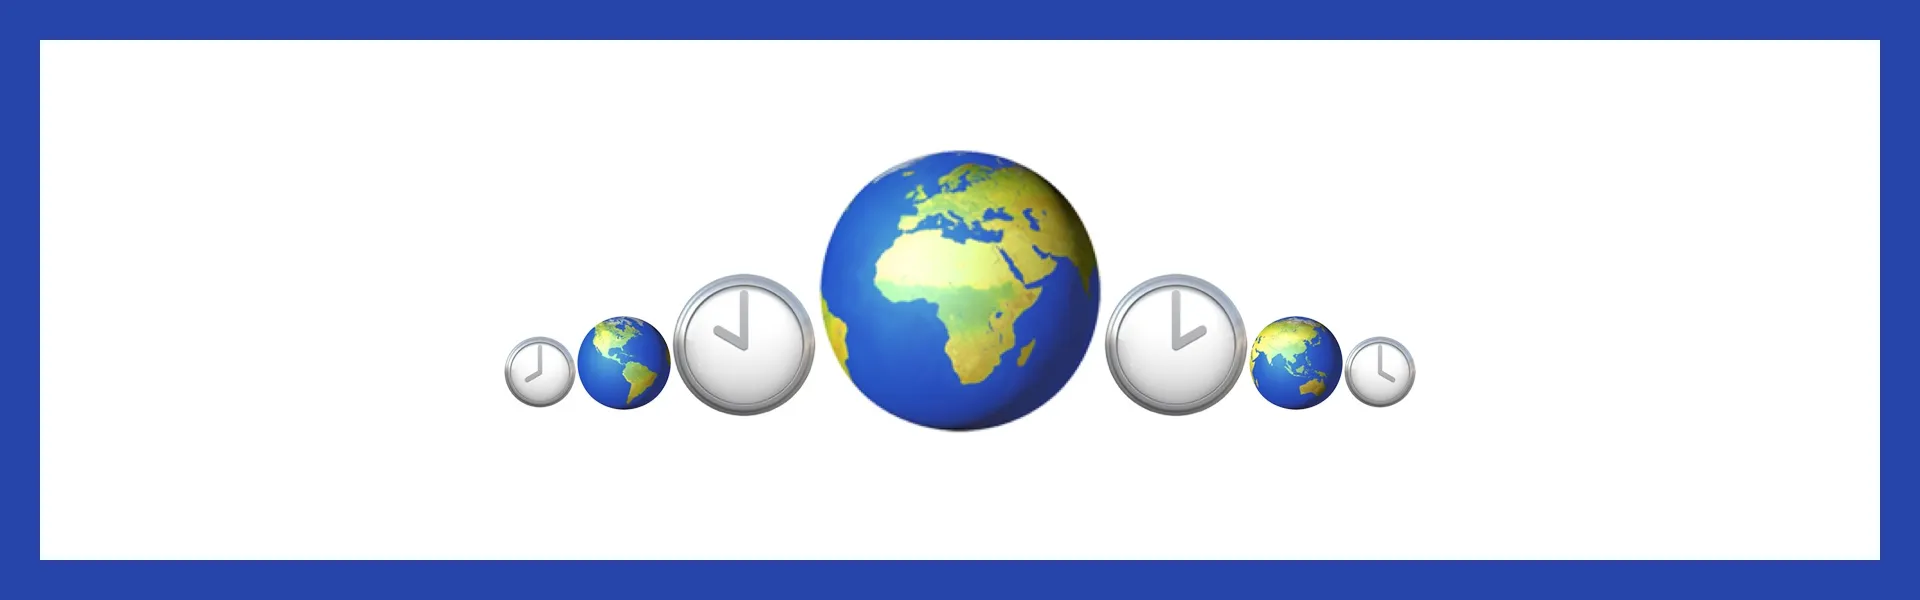 Different sides of the world offset by clocks showing different times